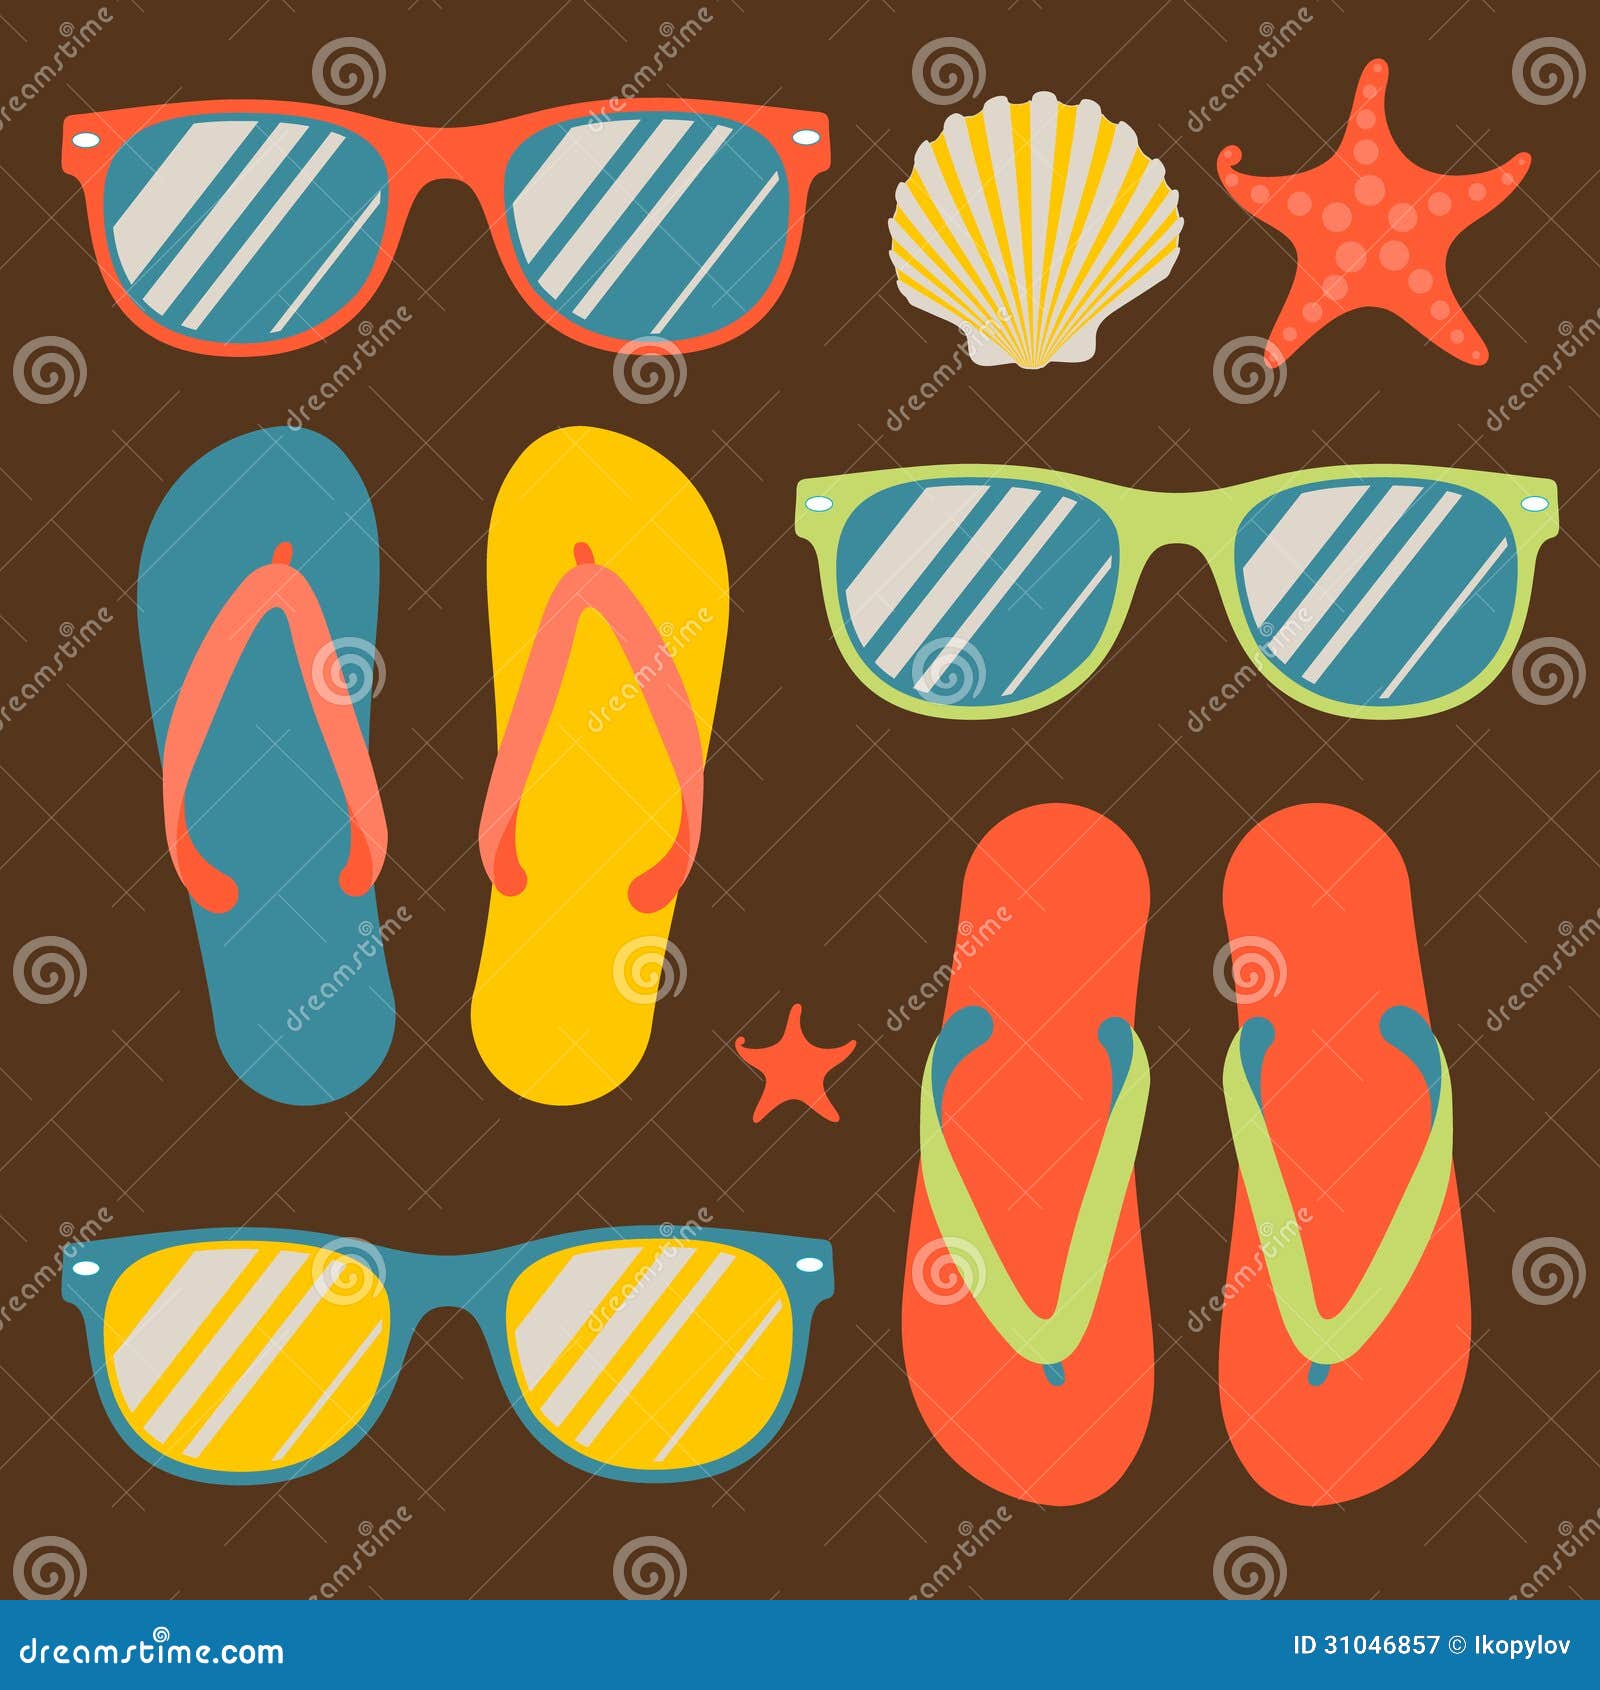 Summer Vibe Clipart Summer Items Set With Sun Glasses Cartoon Vector PNG  Transparent Background And Clipart Image For Free Download - Lovepik |  380549396